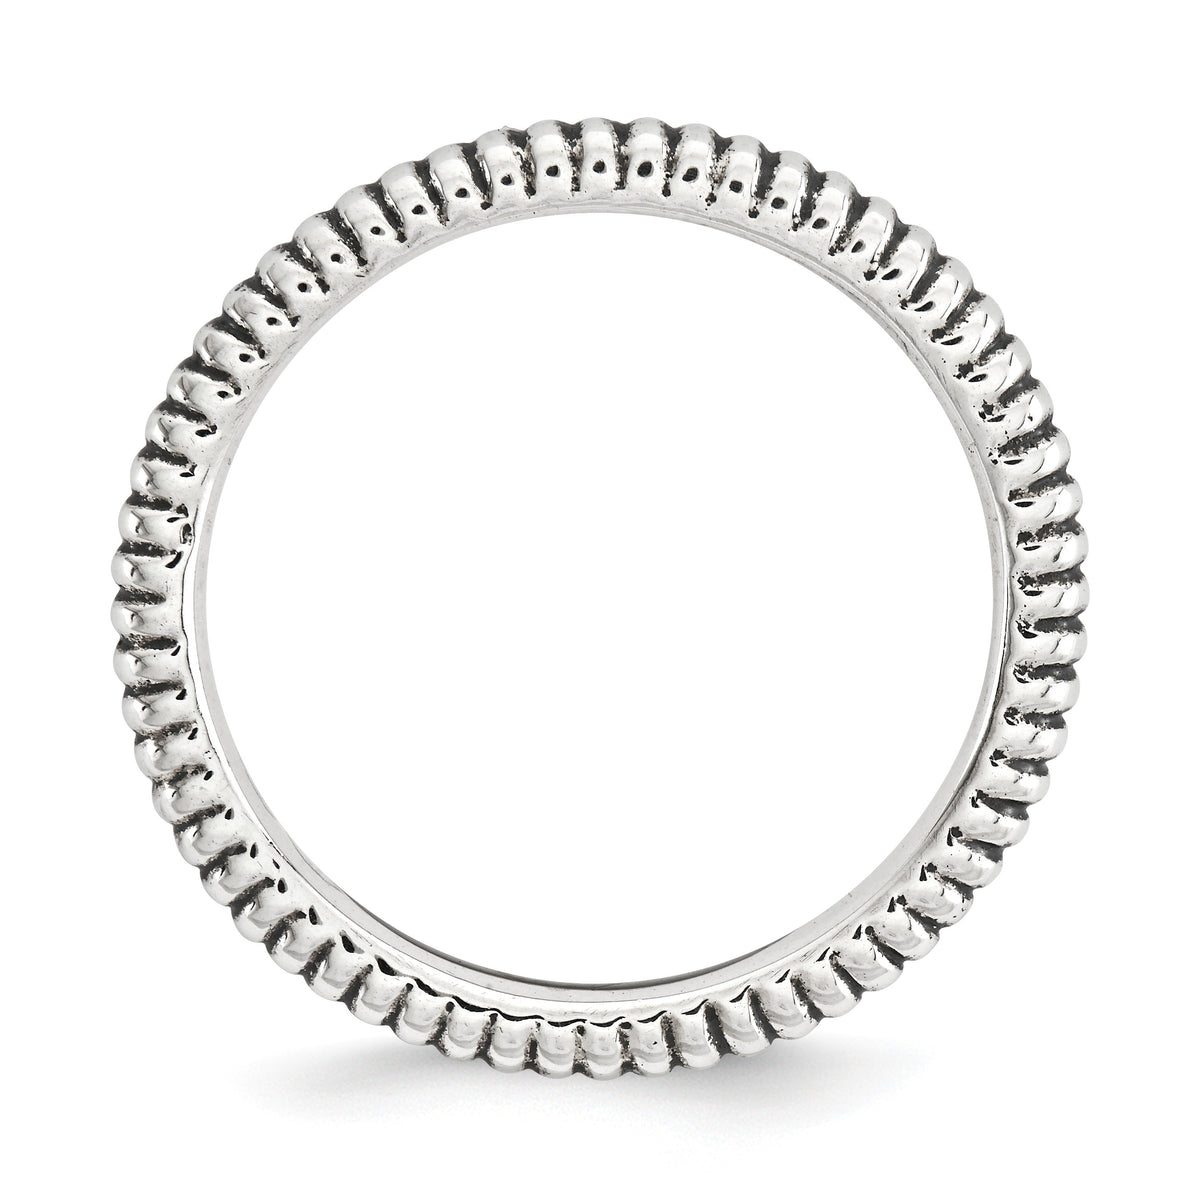 Alternate view of the 2.5mm Sterling Silver Stackable Antiqued Coiled Band by The Black Bow Jewelry Co.